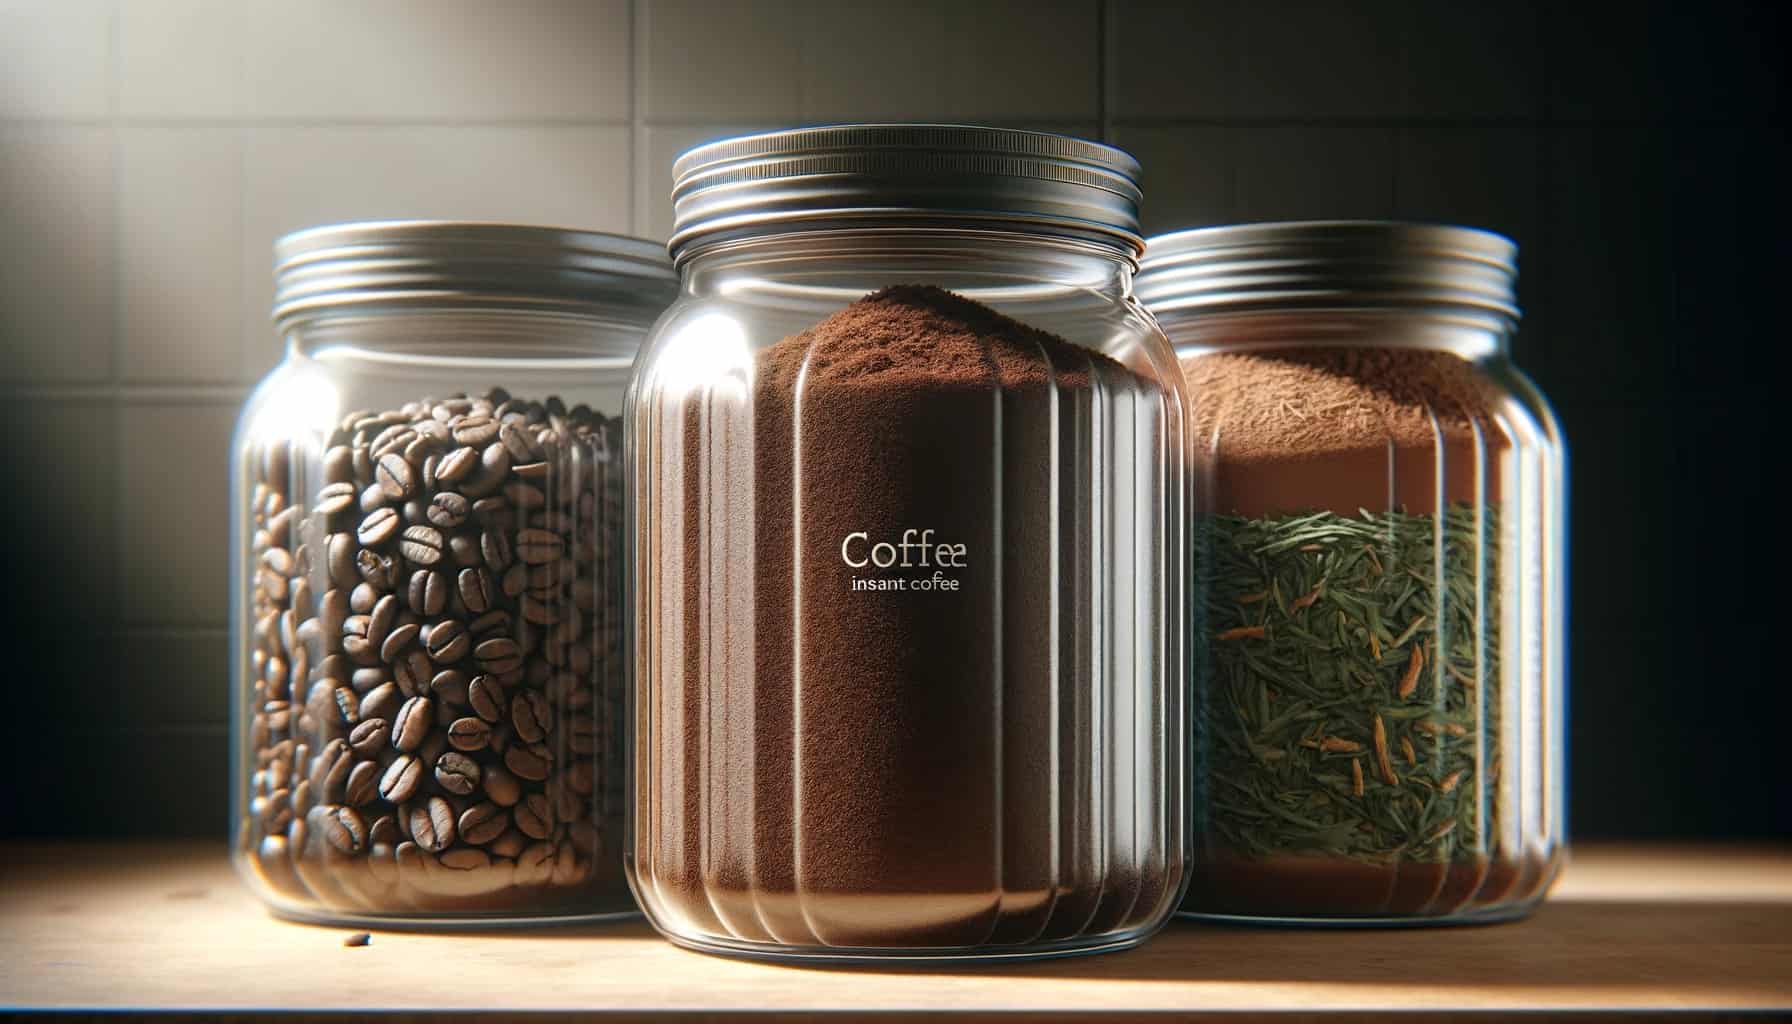 Instant coffee, tea, and cocoa, each stored in separate clear glass jars